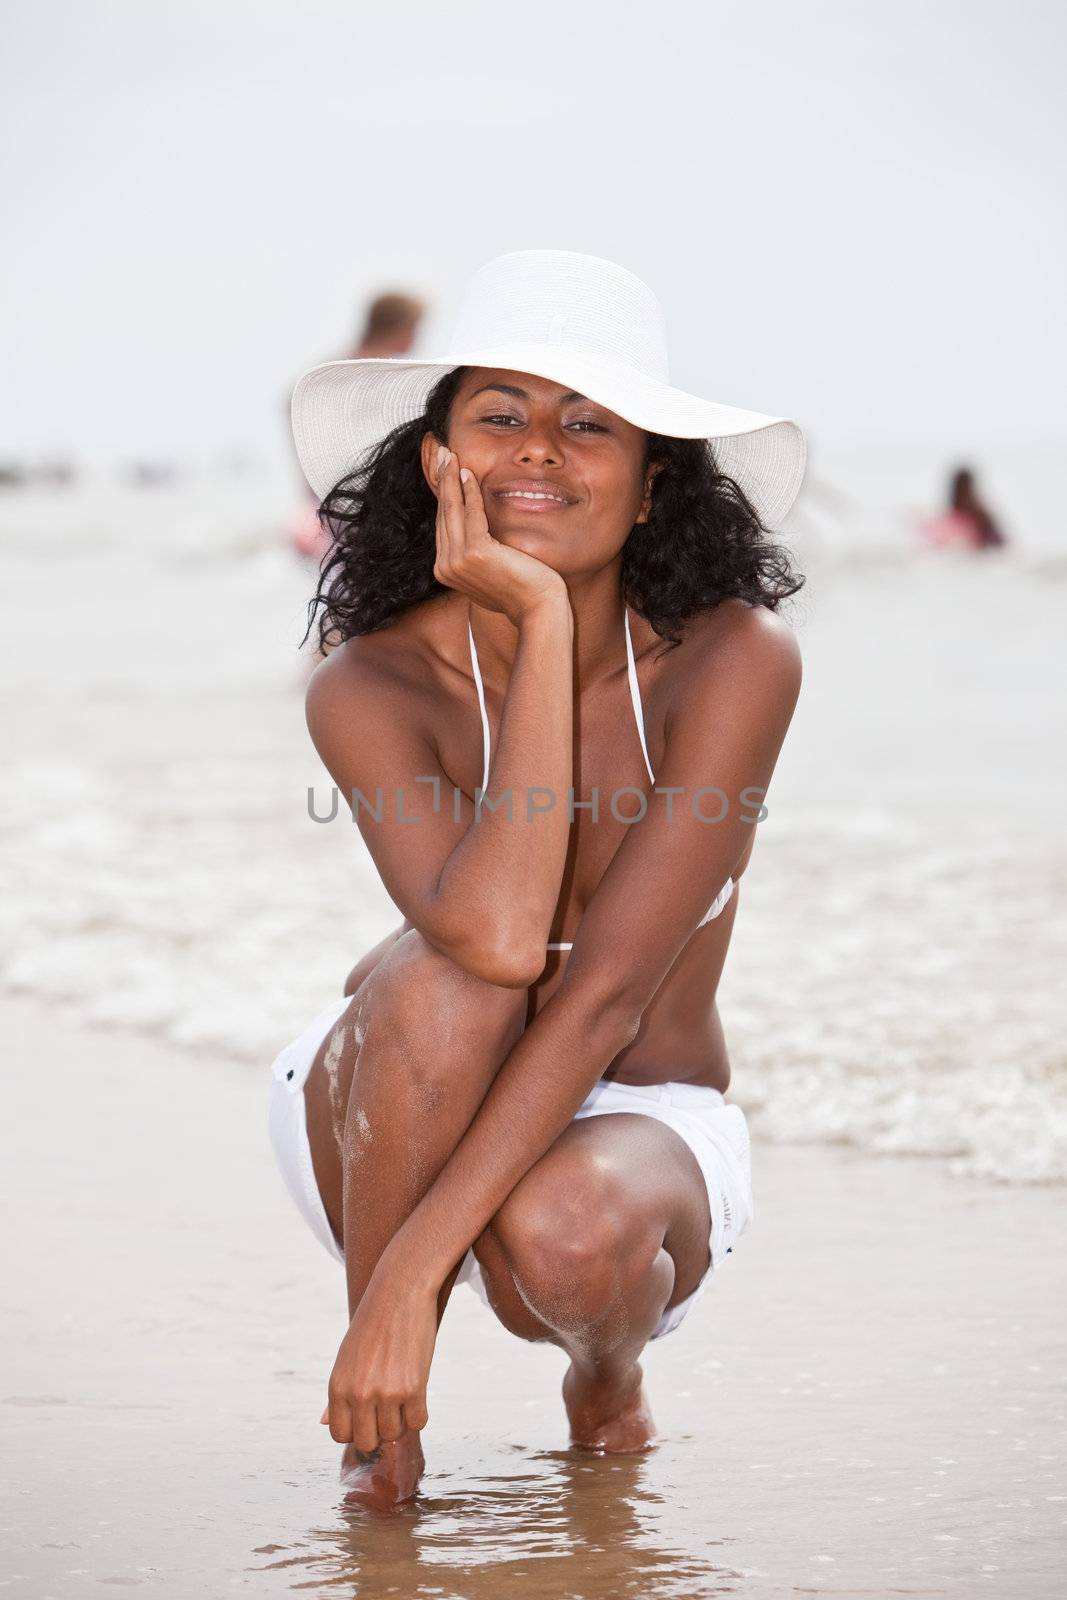 Beautiful brazilian girl with radiant smile relaxing by the waterside